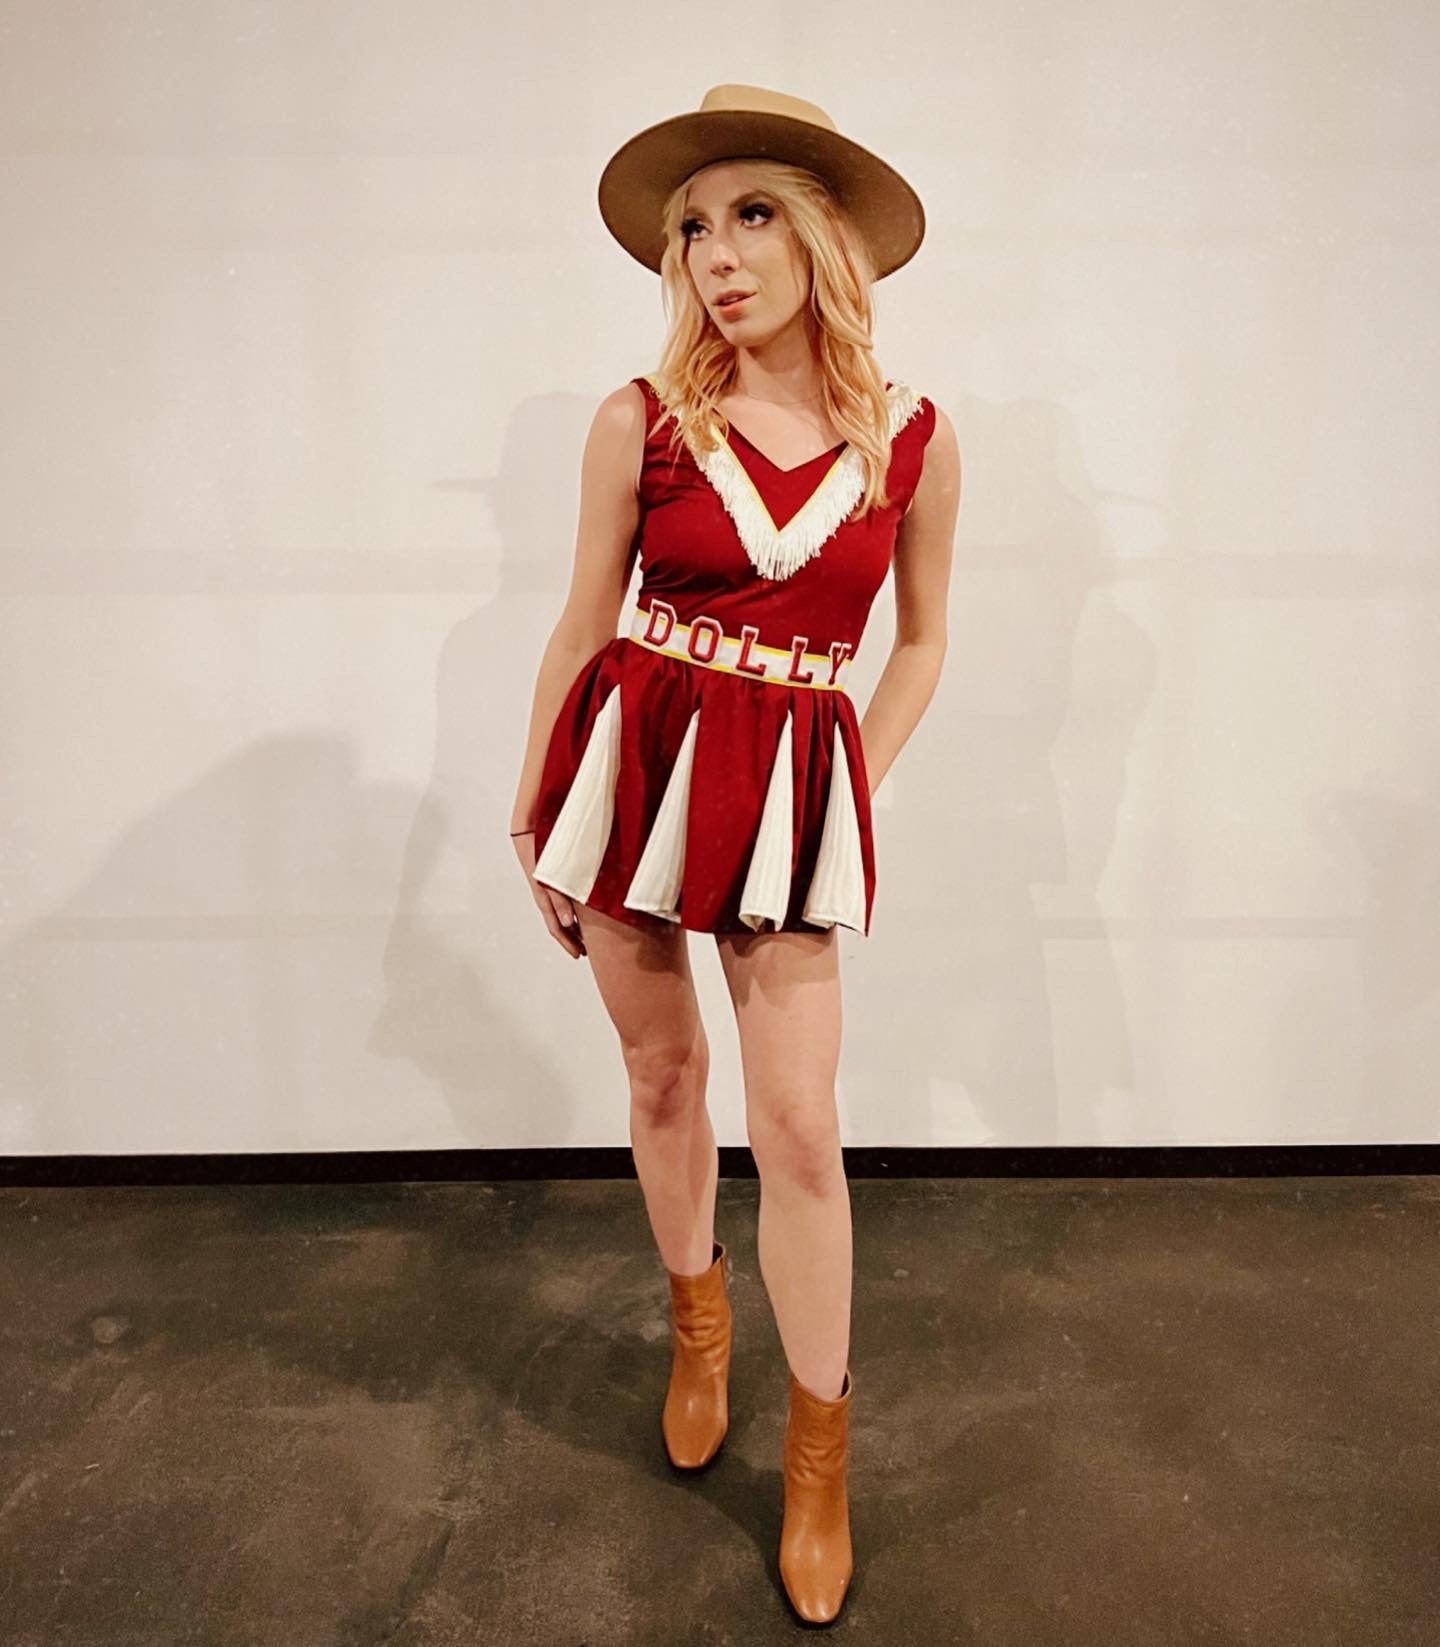 Dolly's 'Rodeo Cowgirl' Cheerleader Costume